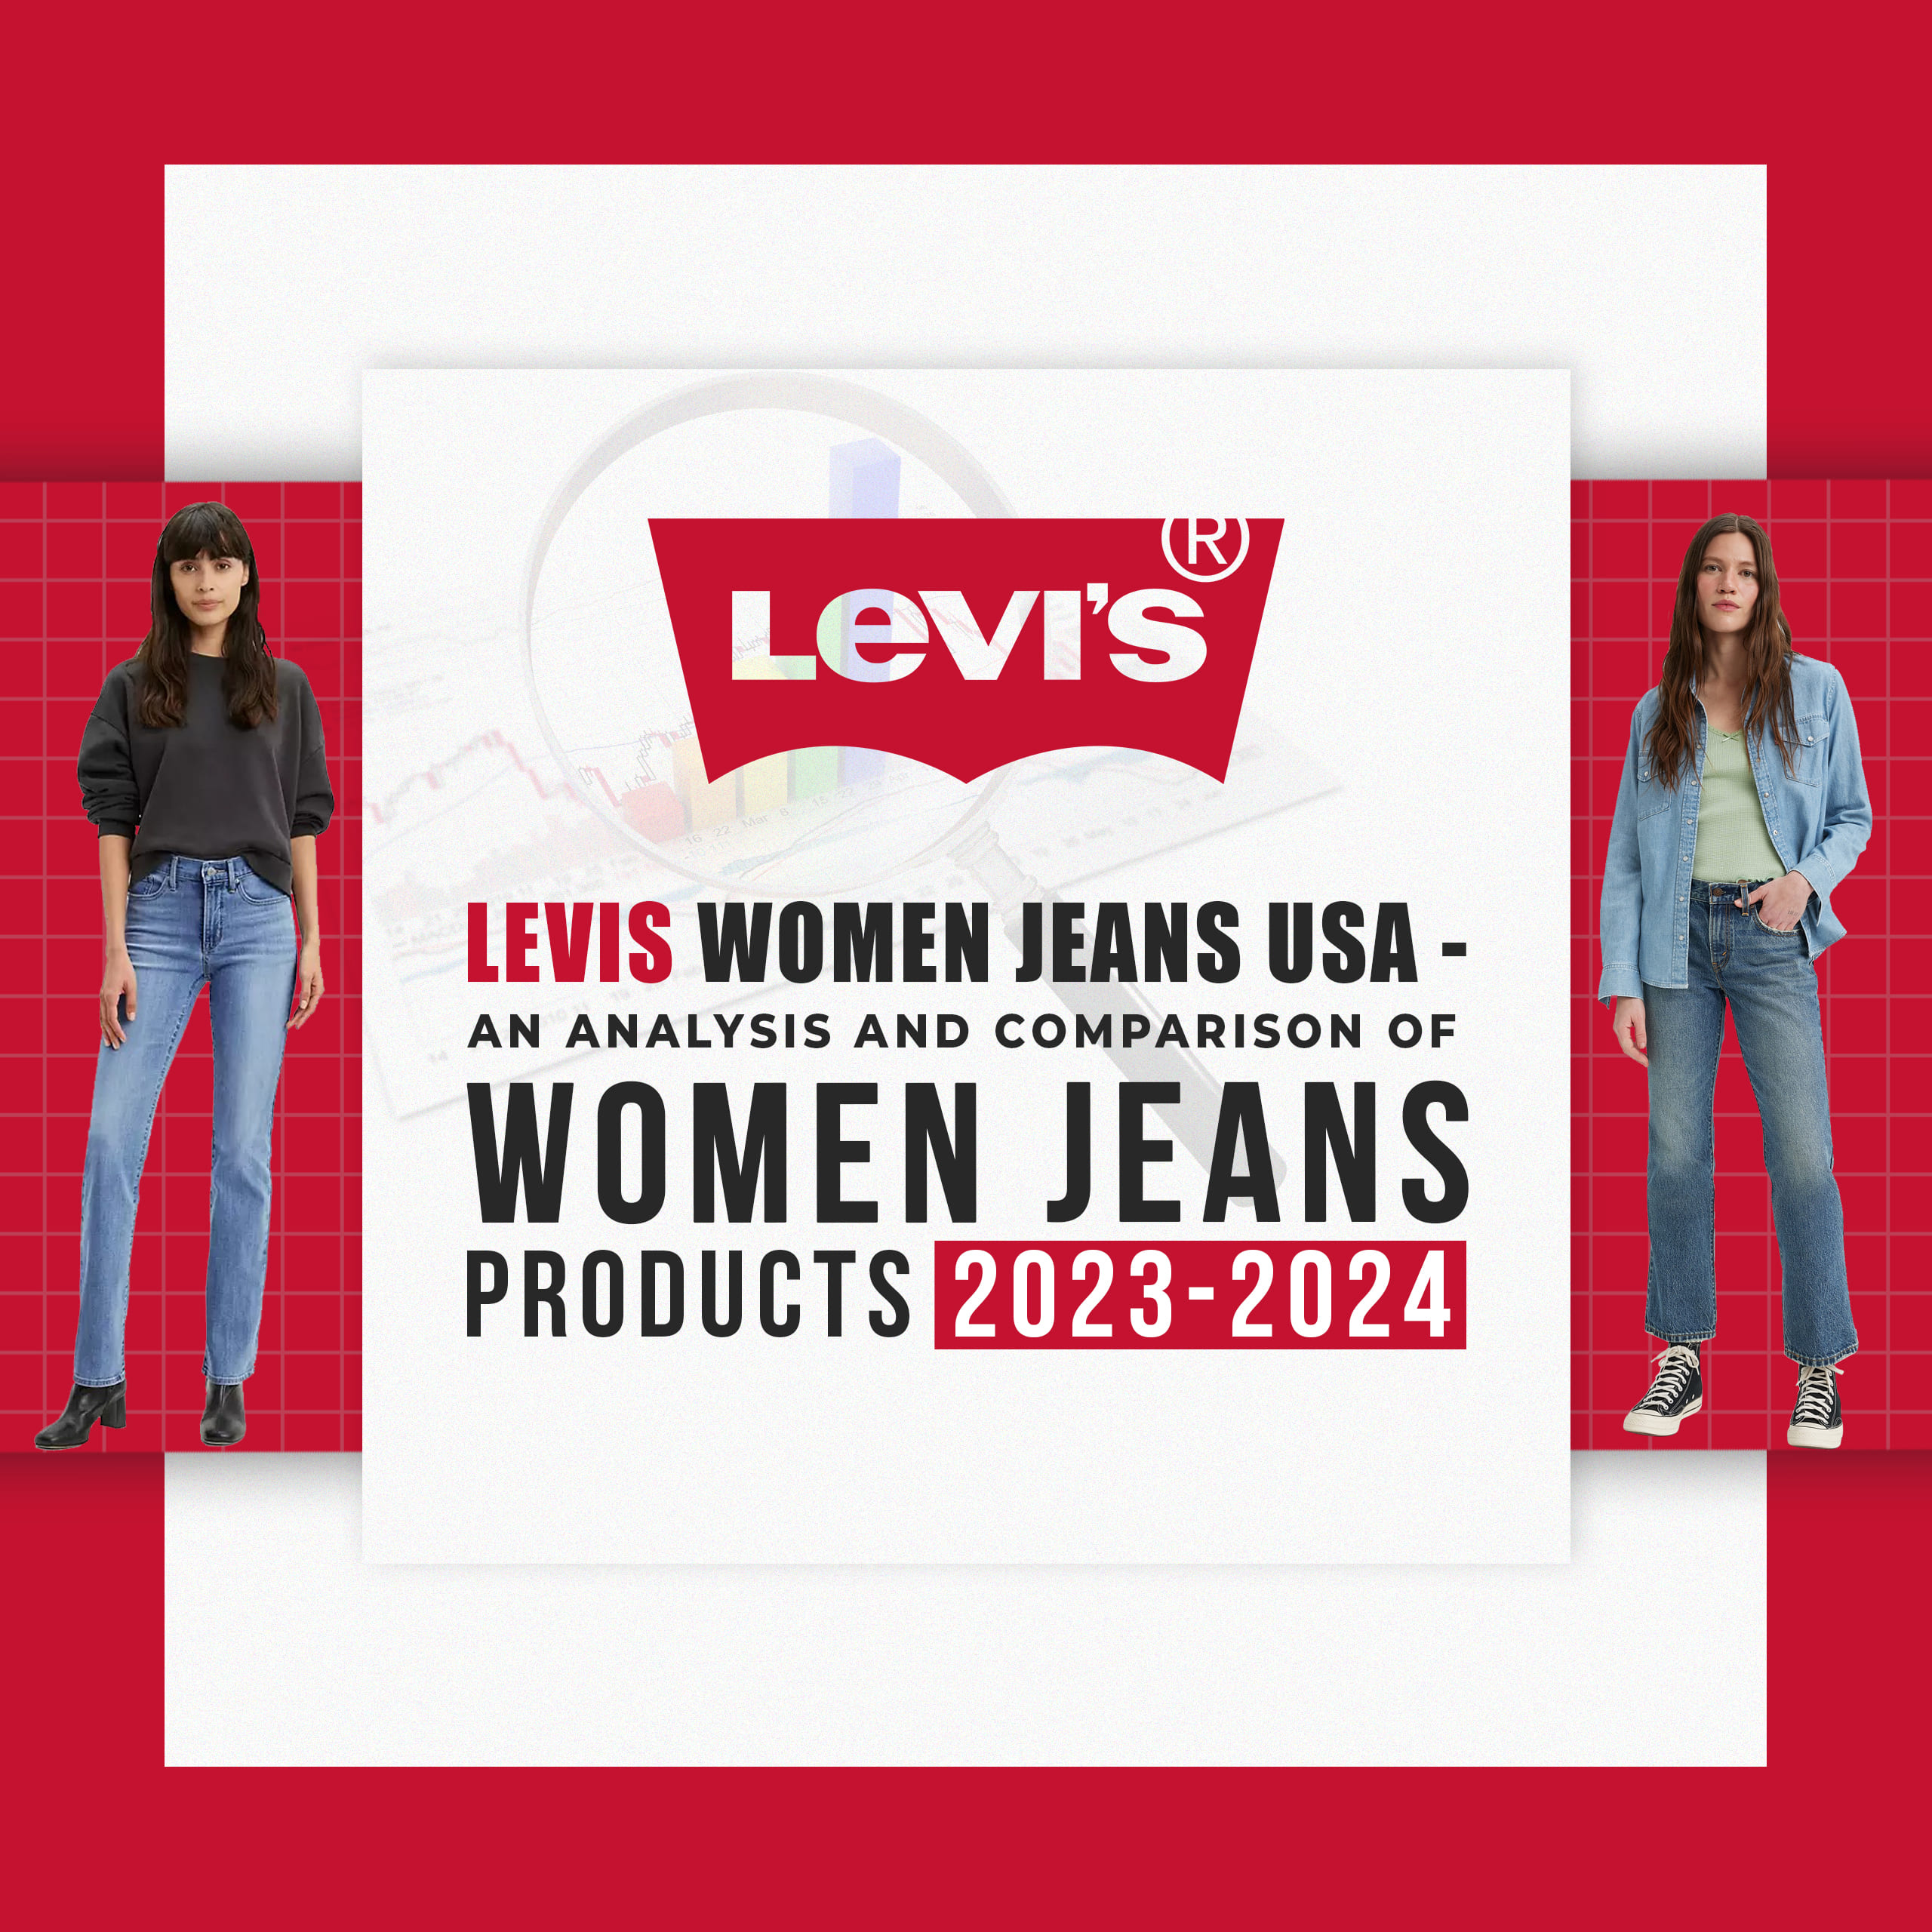 Levi's Women Jeans USA - An Analysis And Comparison Of 2023-2024 ...